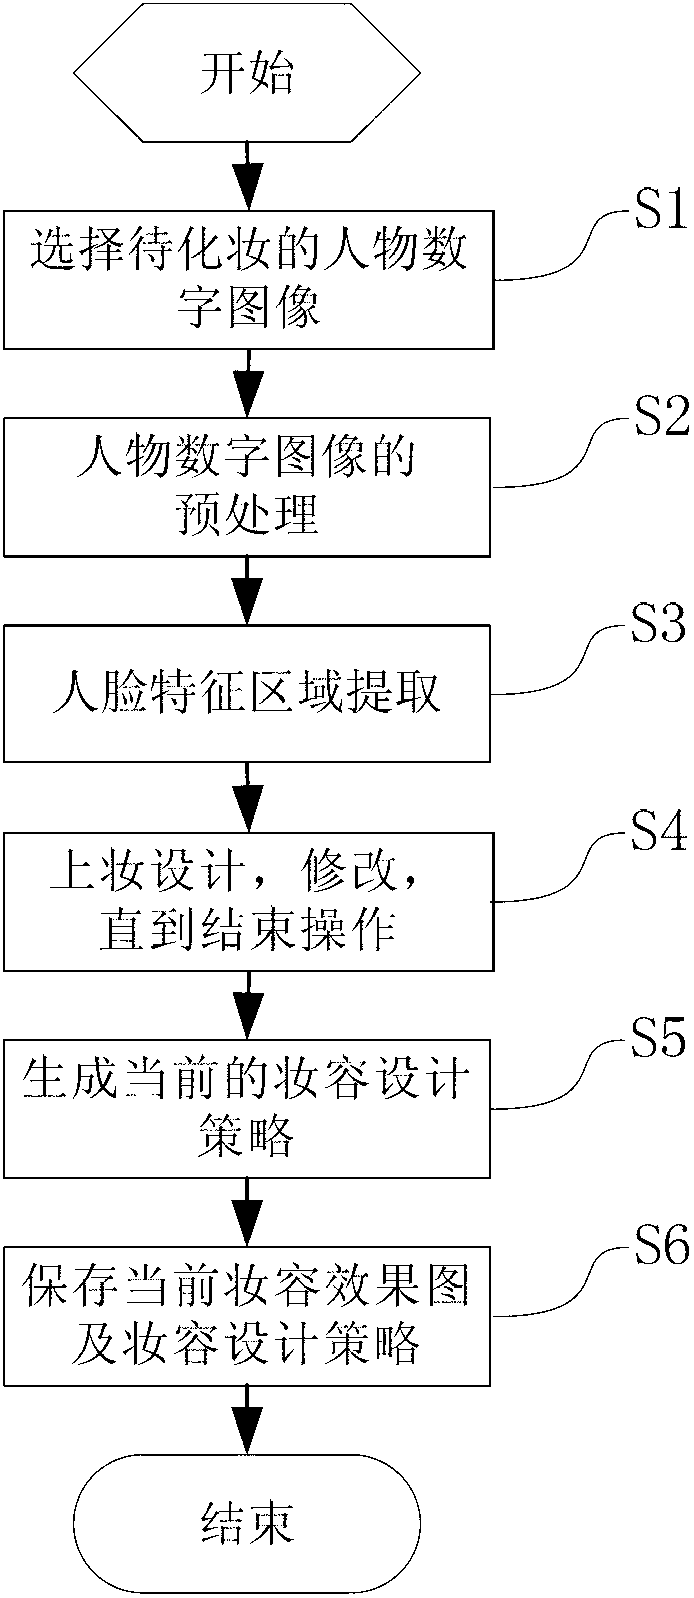 Daily makeup design method and system based on face feature region recognition